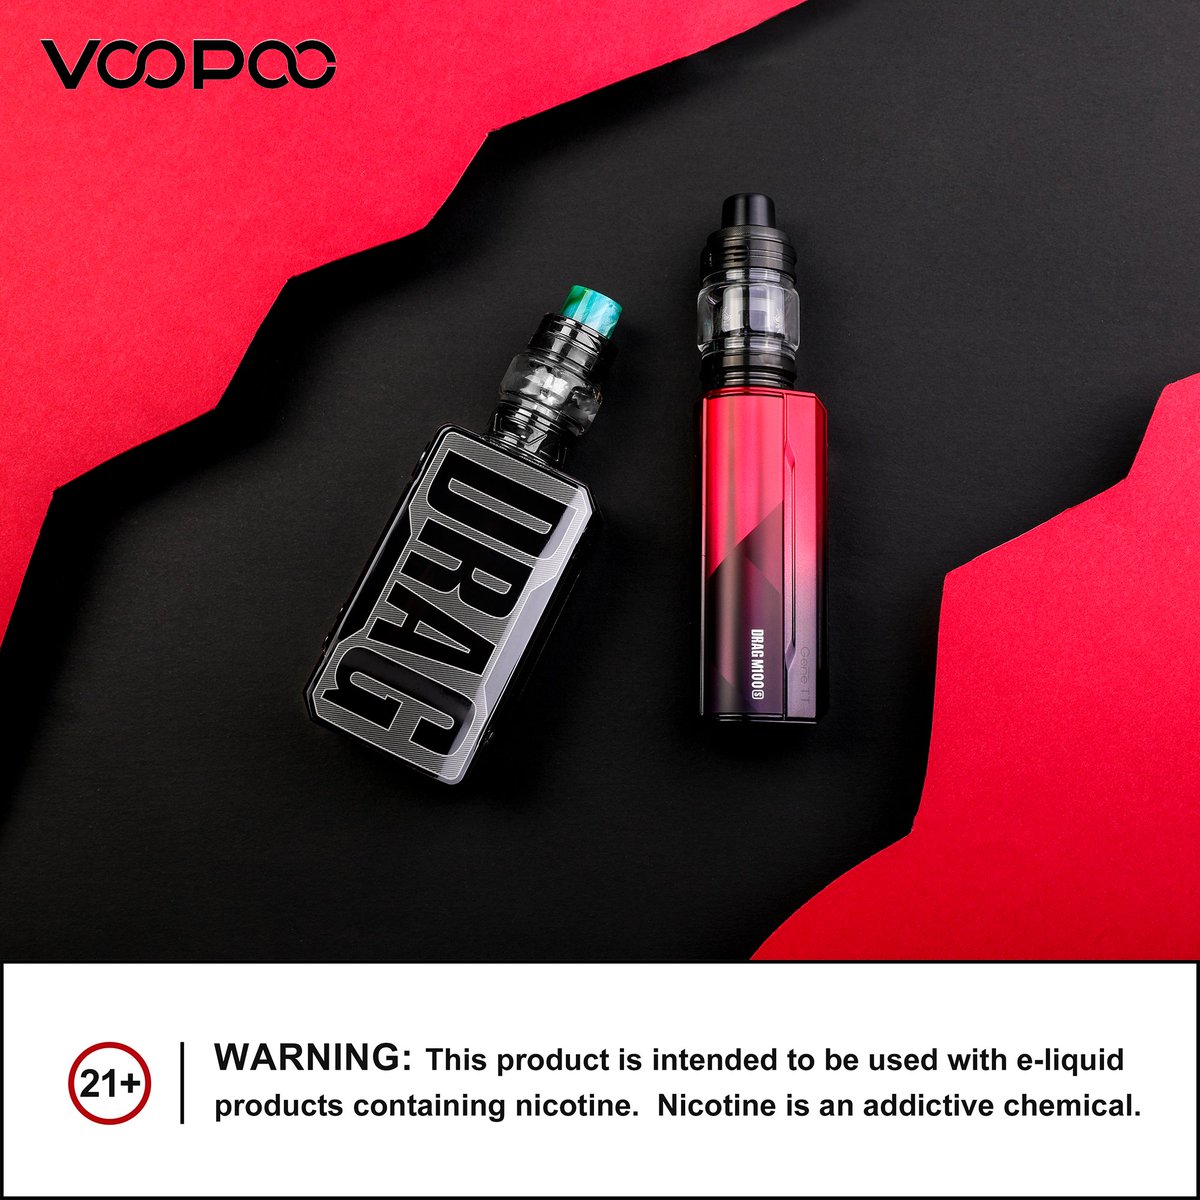 Red & Black DRAG M100S 🆚 Classic Drag 2
Which one is your favorite?❤

Whether you prefer daring, or sleek, we've got you covered. 😎

#redandblack #newproducts #voopoo #dragm100s #drag2 #voopoodrag #dragmodfamily #vapecommunity #vapelife